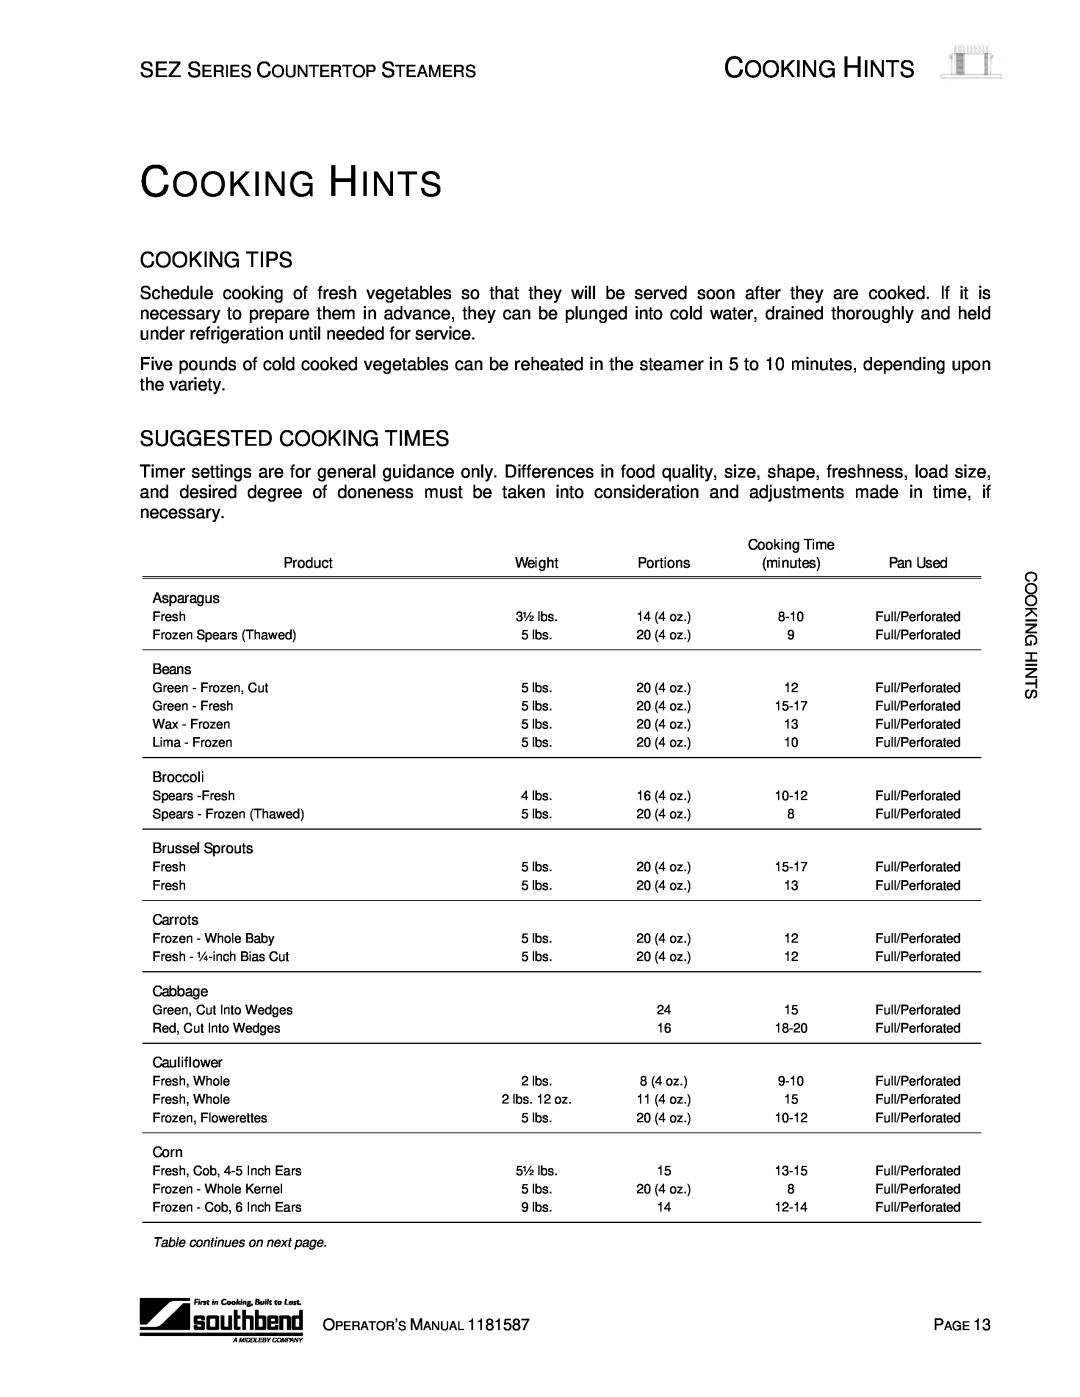 Southbend SEZ-3, SEZ-5 manual Cooking Hints, Cooking Tips, Suggested Cooking Times 